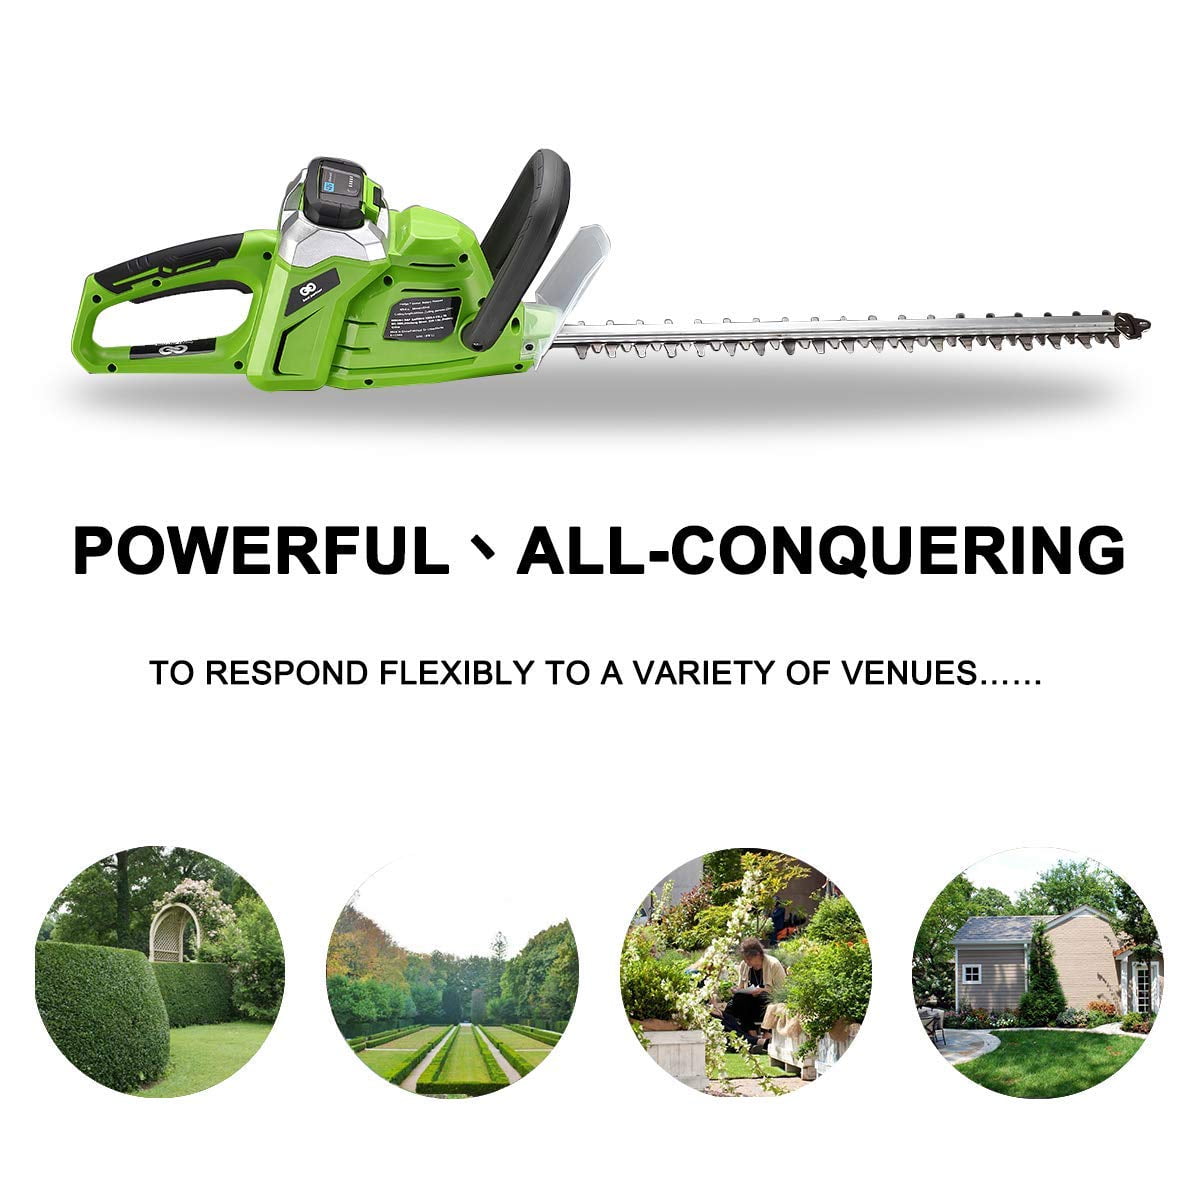 cordless electric hedge trimmer